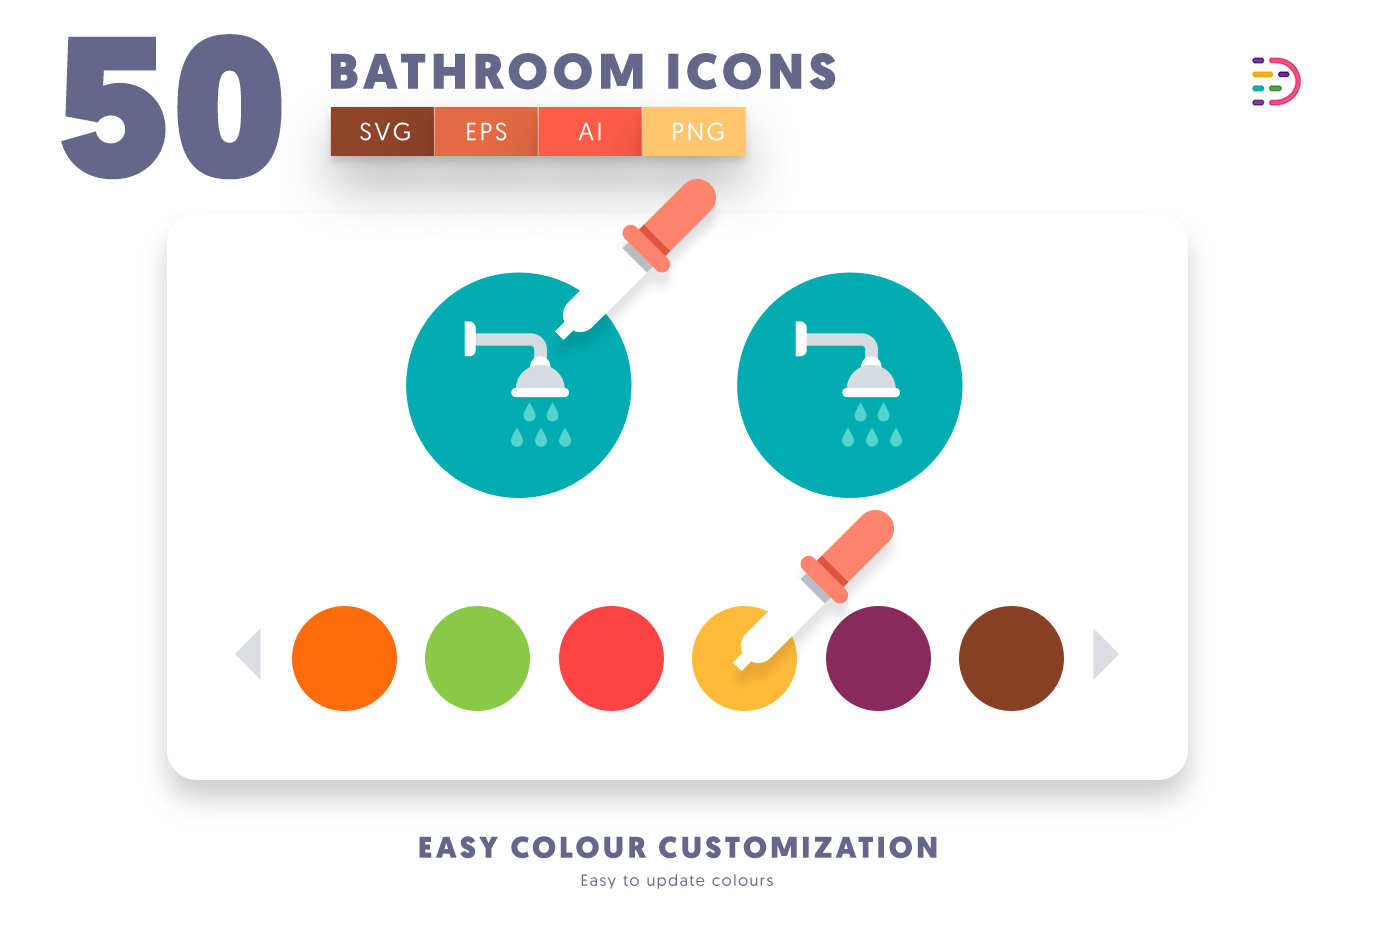 Compatible Bathroom Icons pack